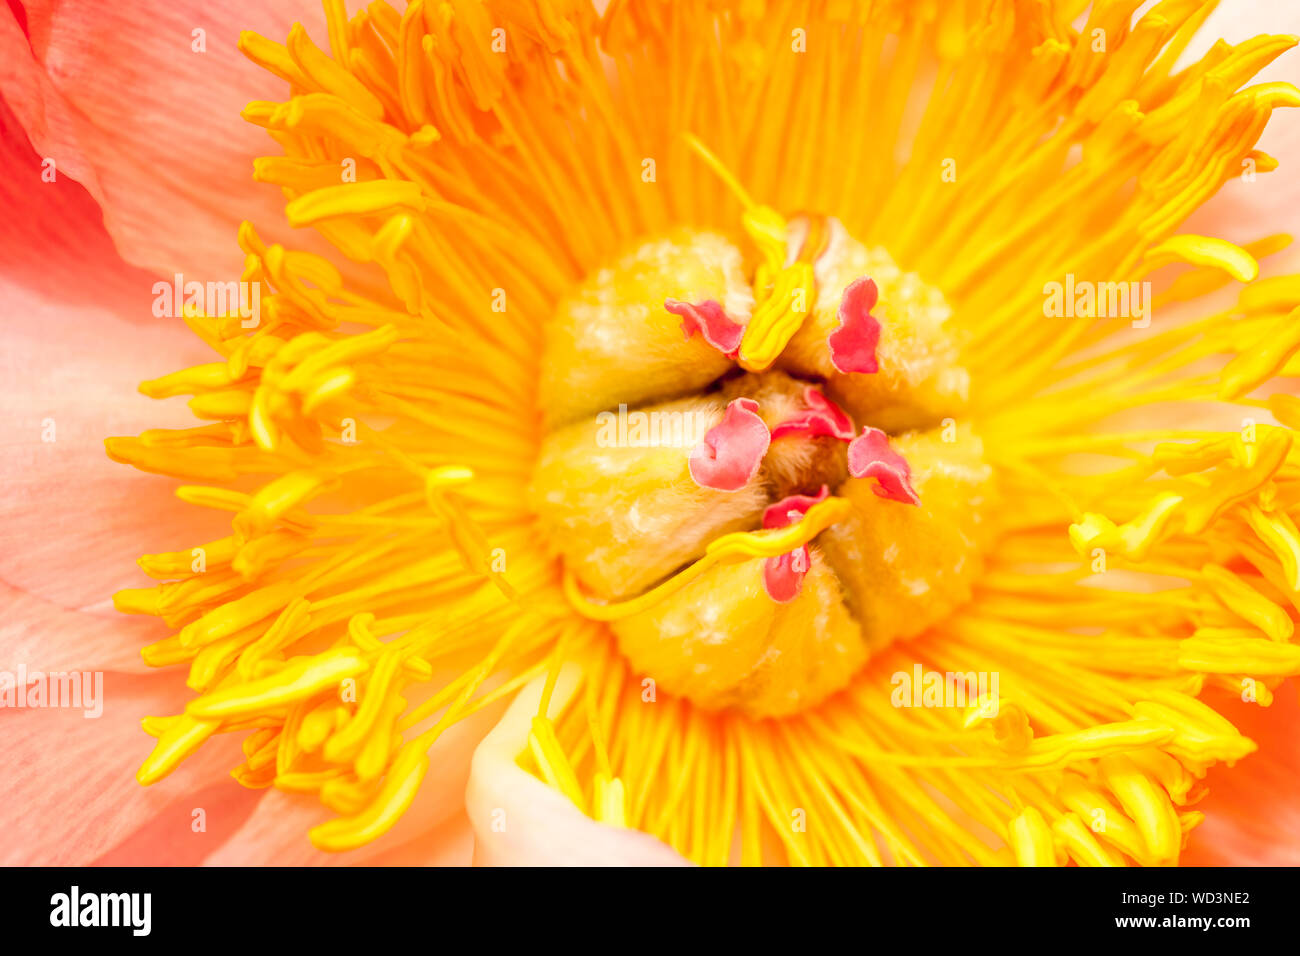 Detail view of the inside part of a pink peony with yellow stamps. Stock Photo